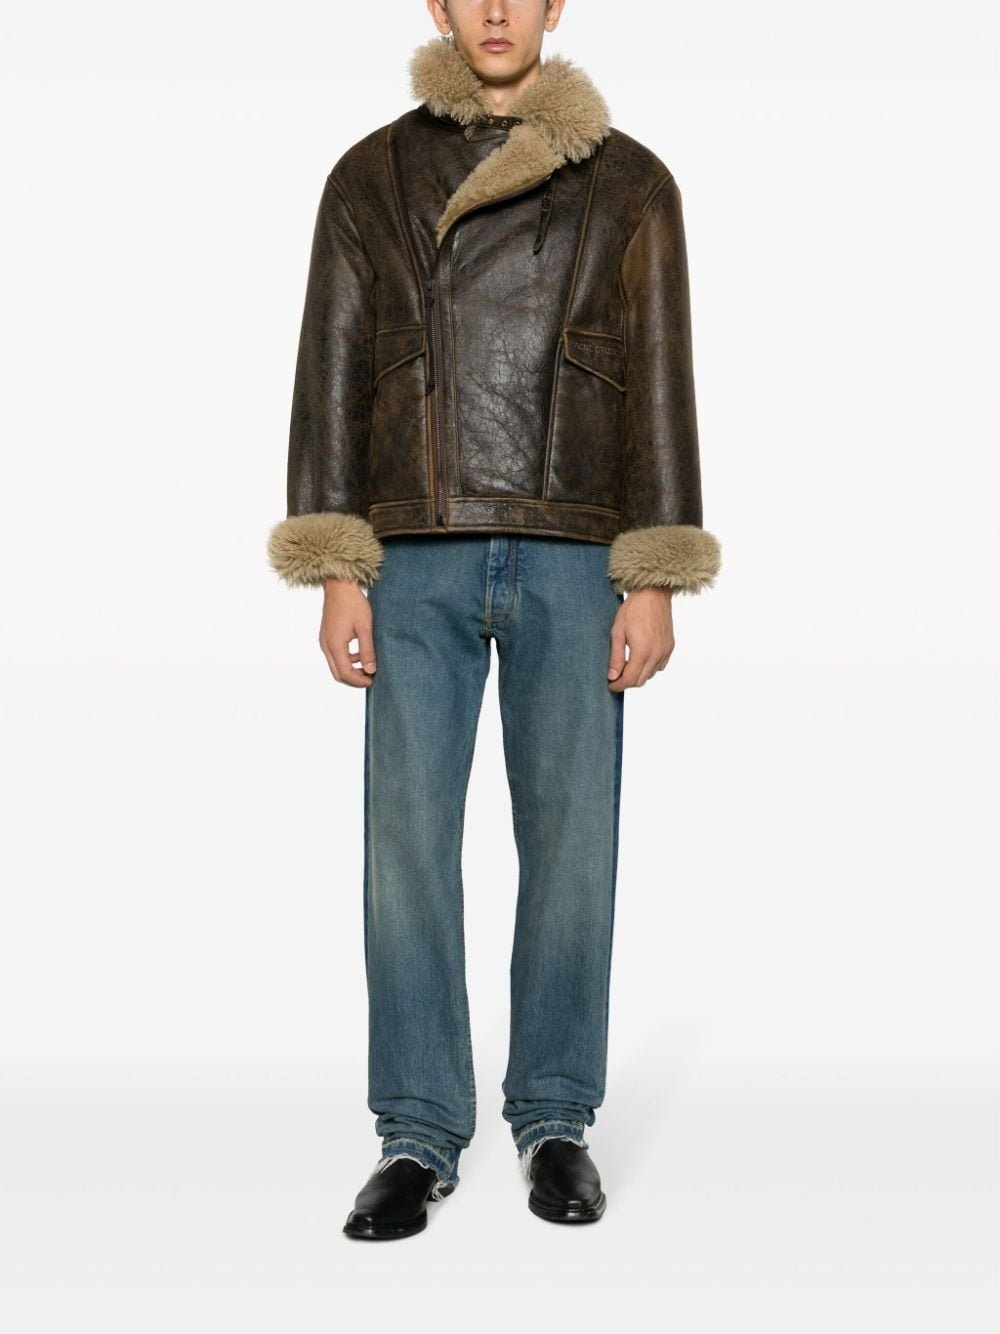 ACNE STUDIOS-LEATHER OUTERWEAR-B70128 AFQ